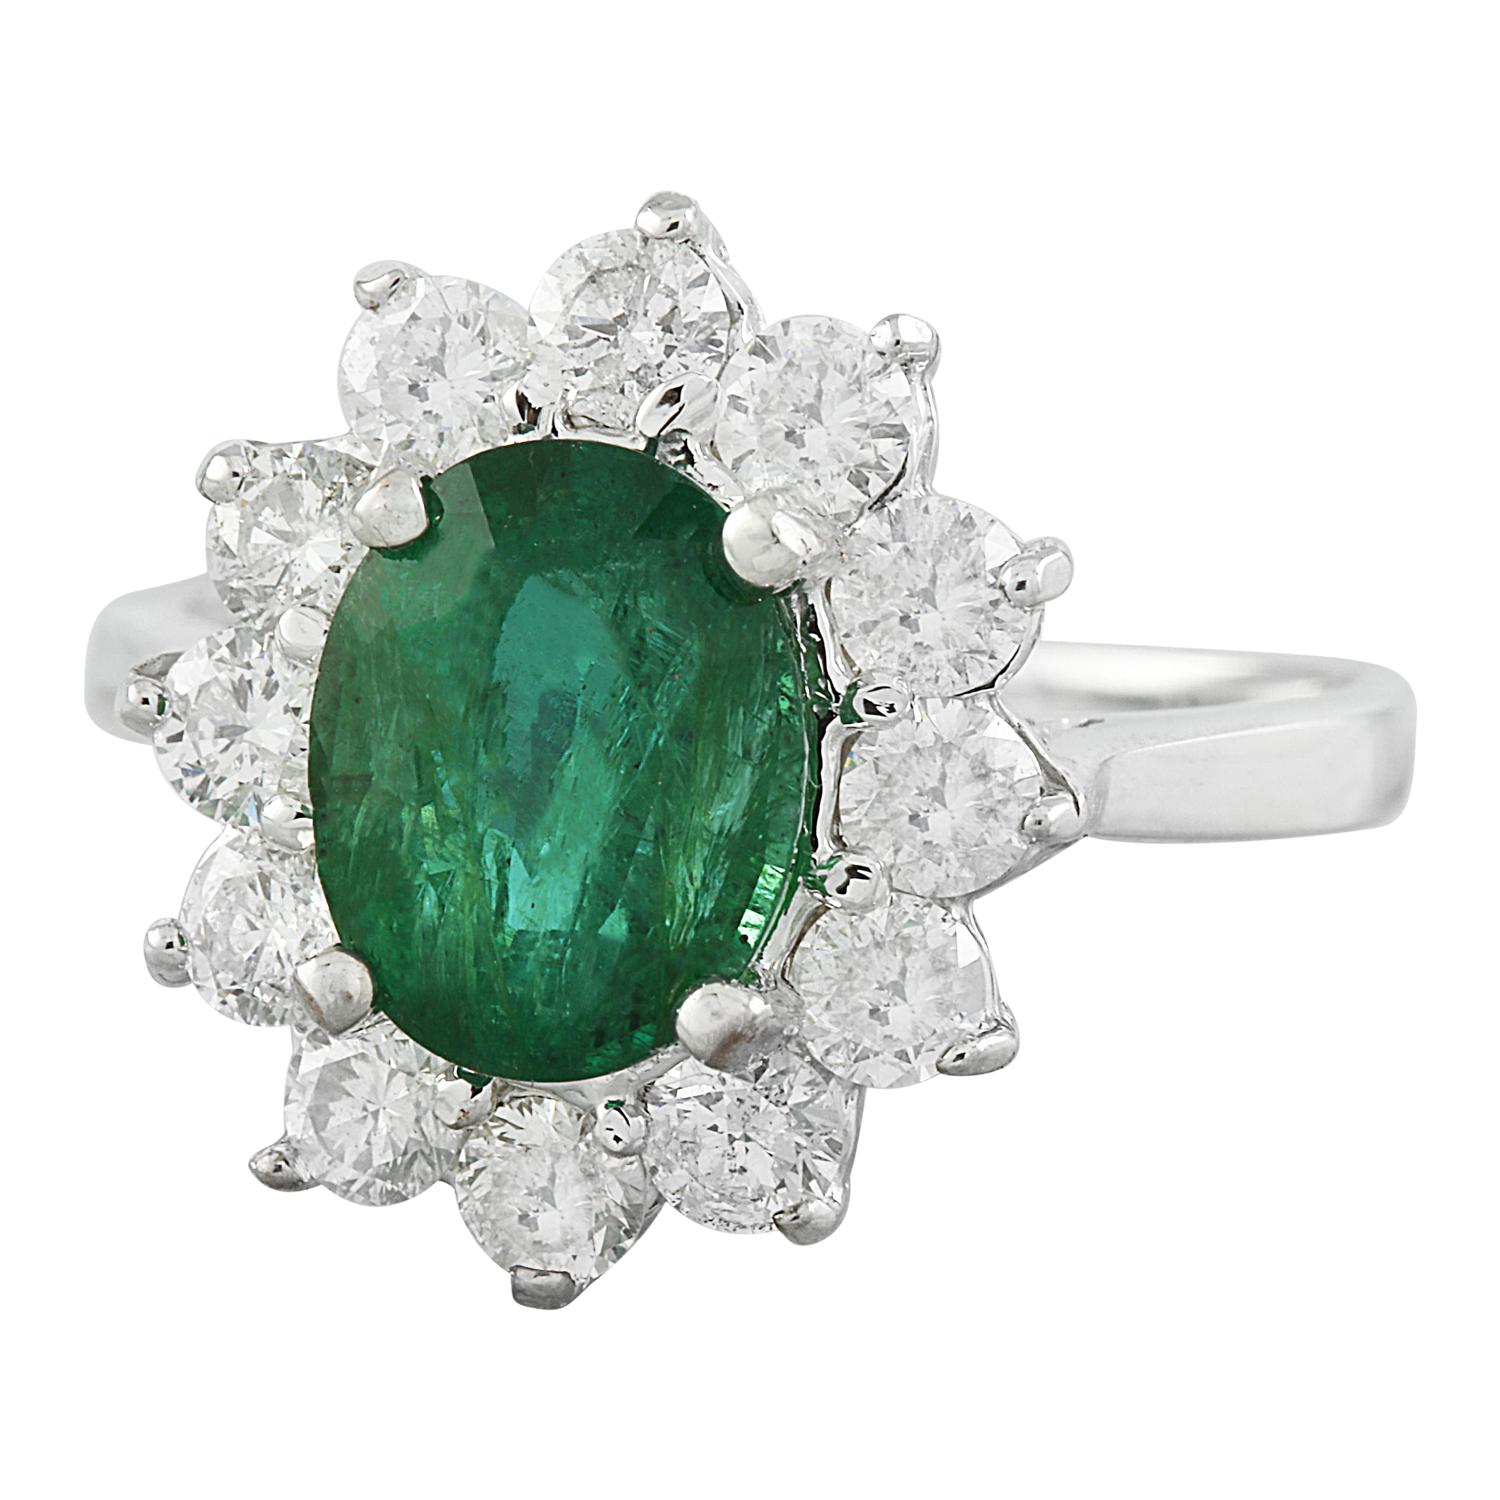 Introducing a captivating union of elegance and sophistication - the 3.23 Carat Natural Emerald 14 Karat Solid White Gold Diamond Ring. This ring is a testament to luxury and refinement.

Crafted to perfection, this ring, sized for a size 7 finger,